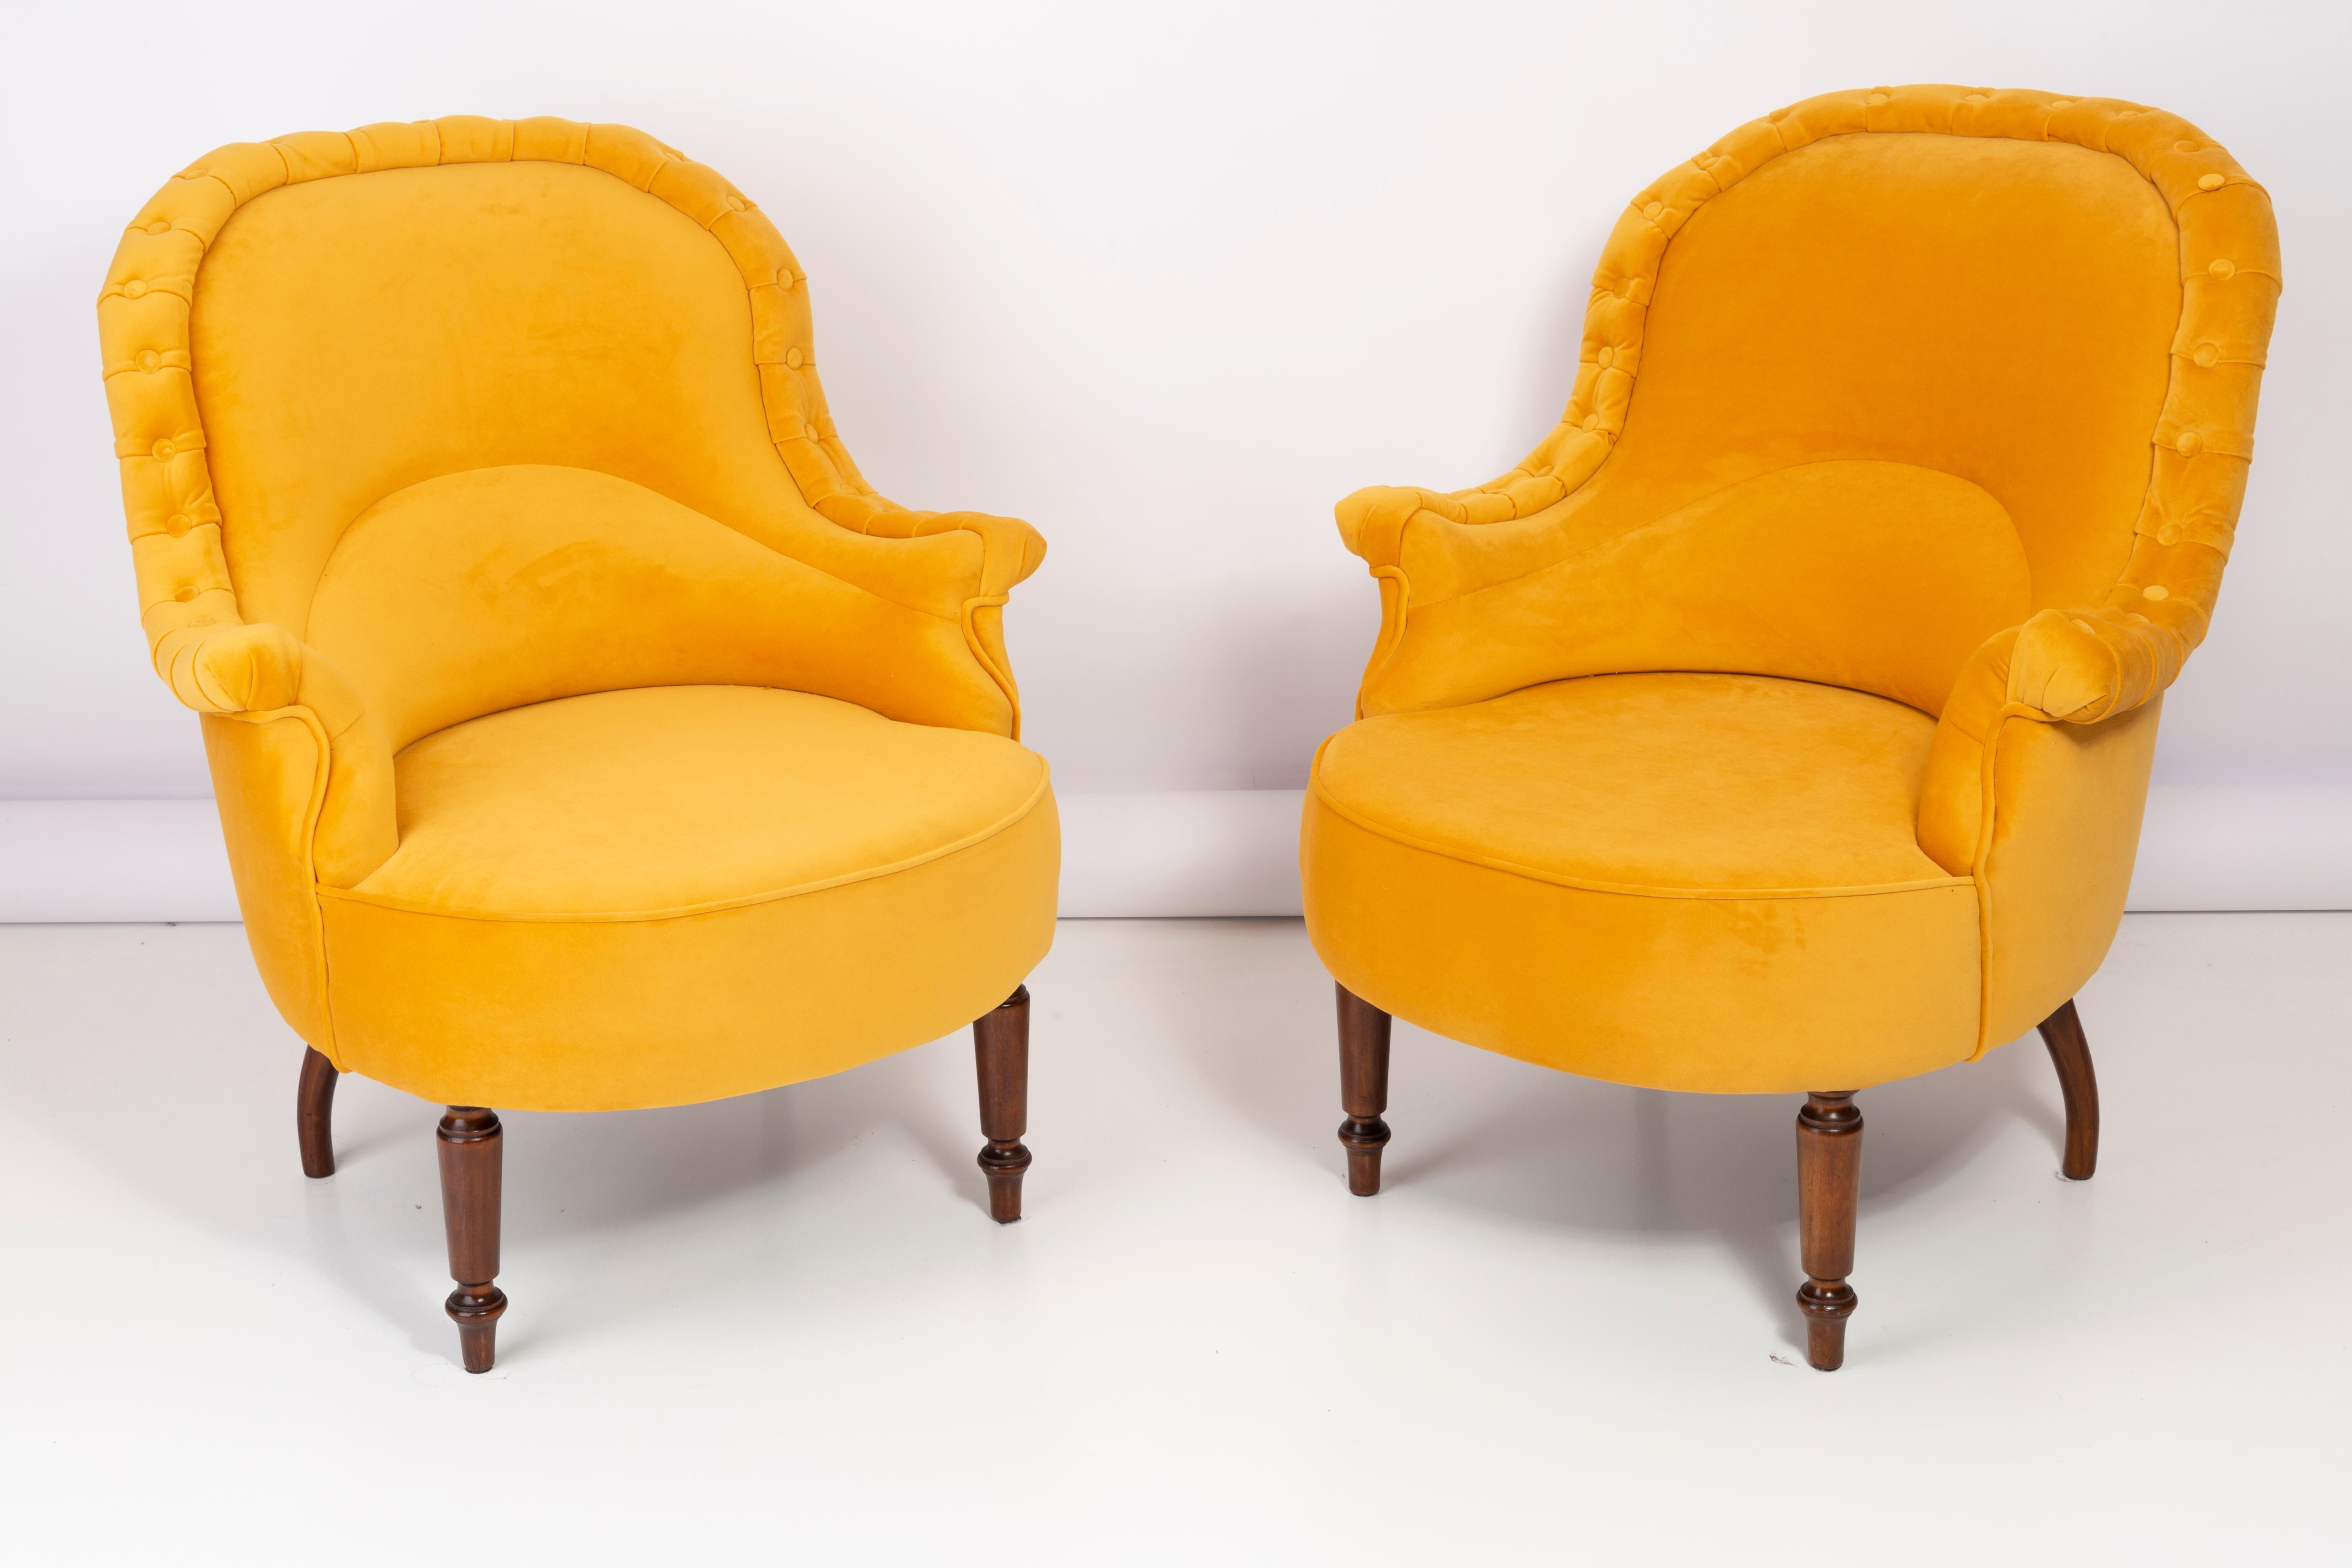 Mid-Century Modern Pair of Unique Yellow Mustard Armchairs, 1930s, Germany For Sale